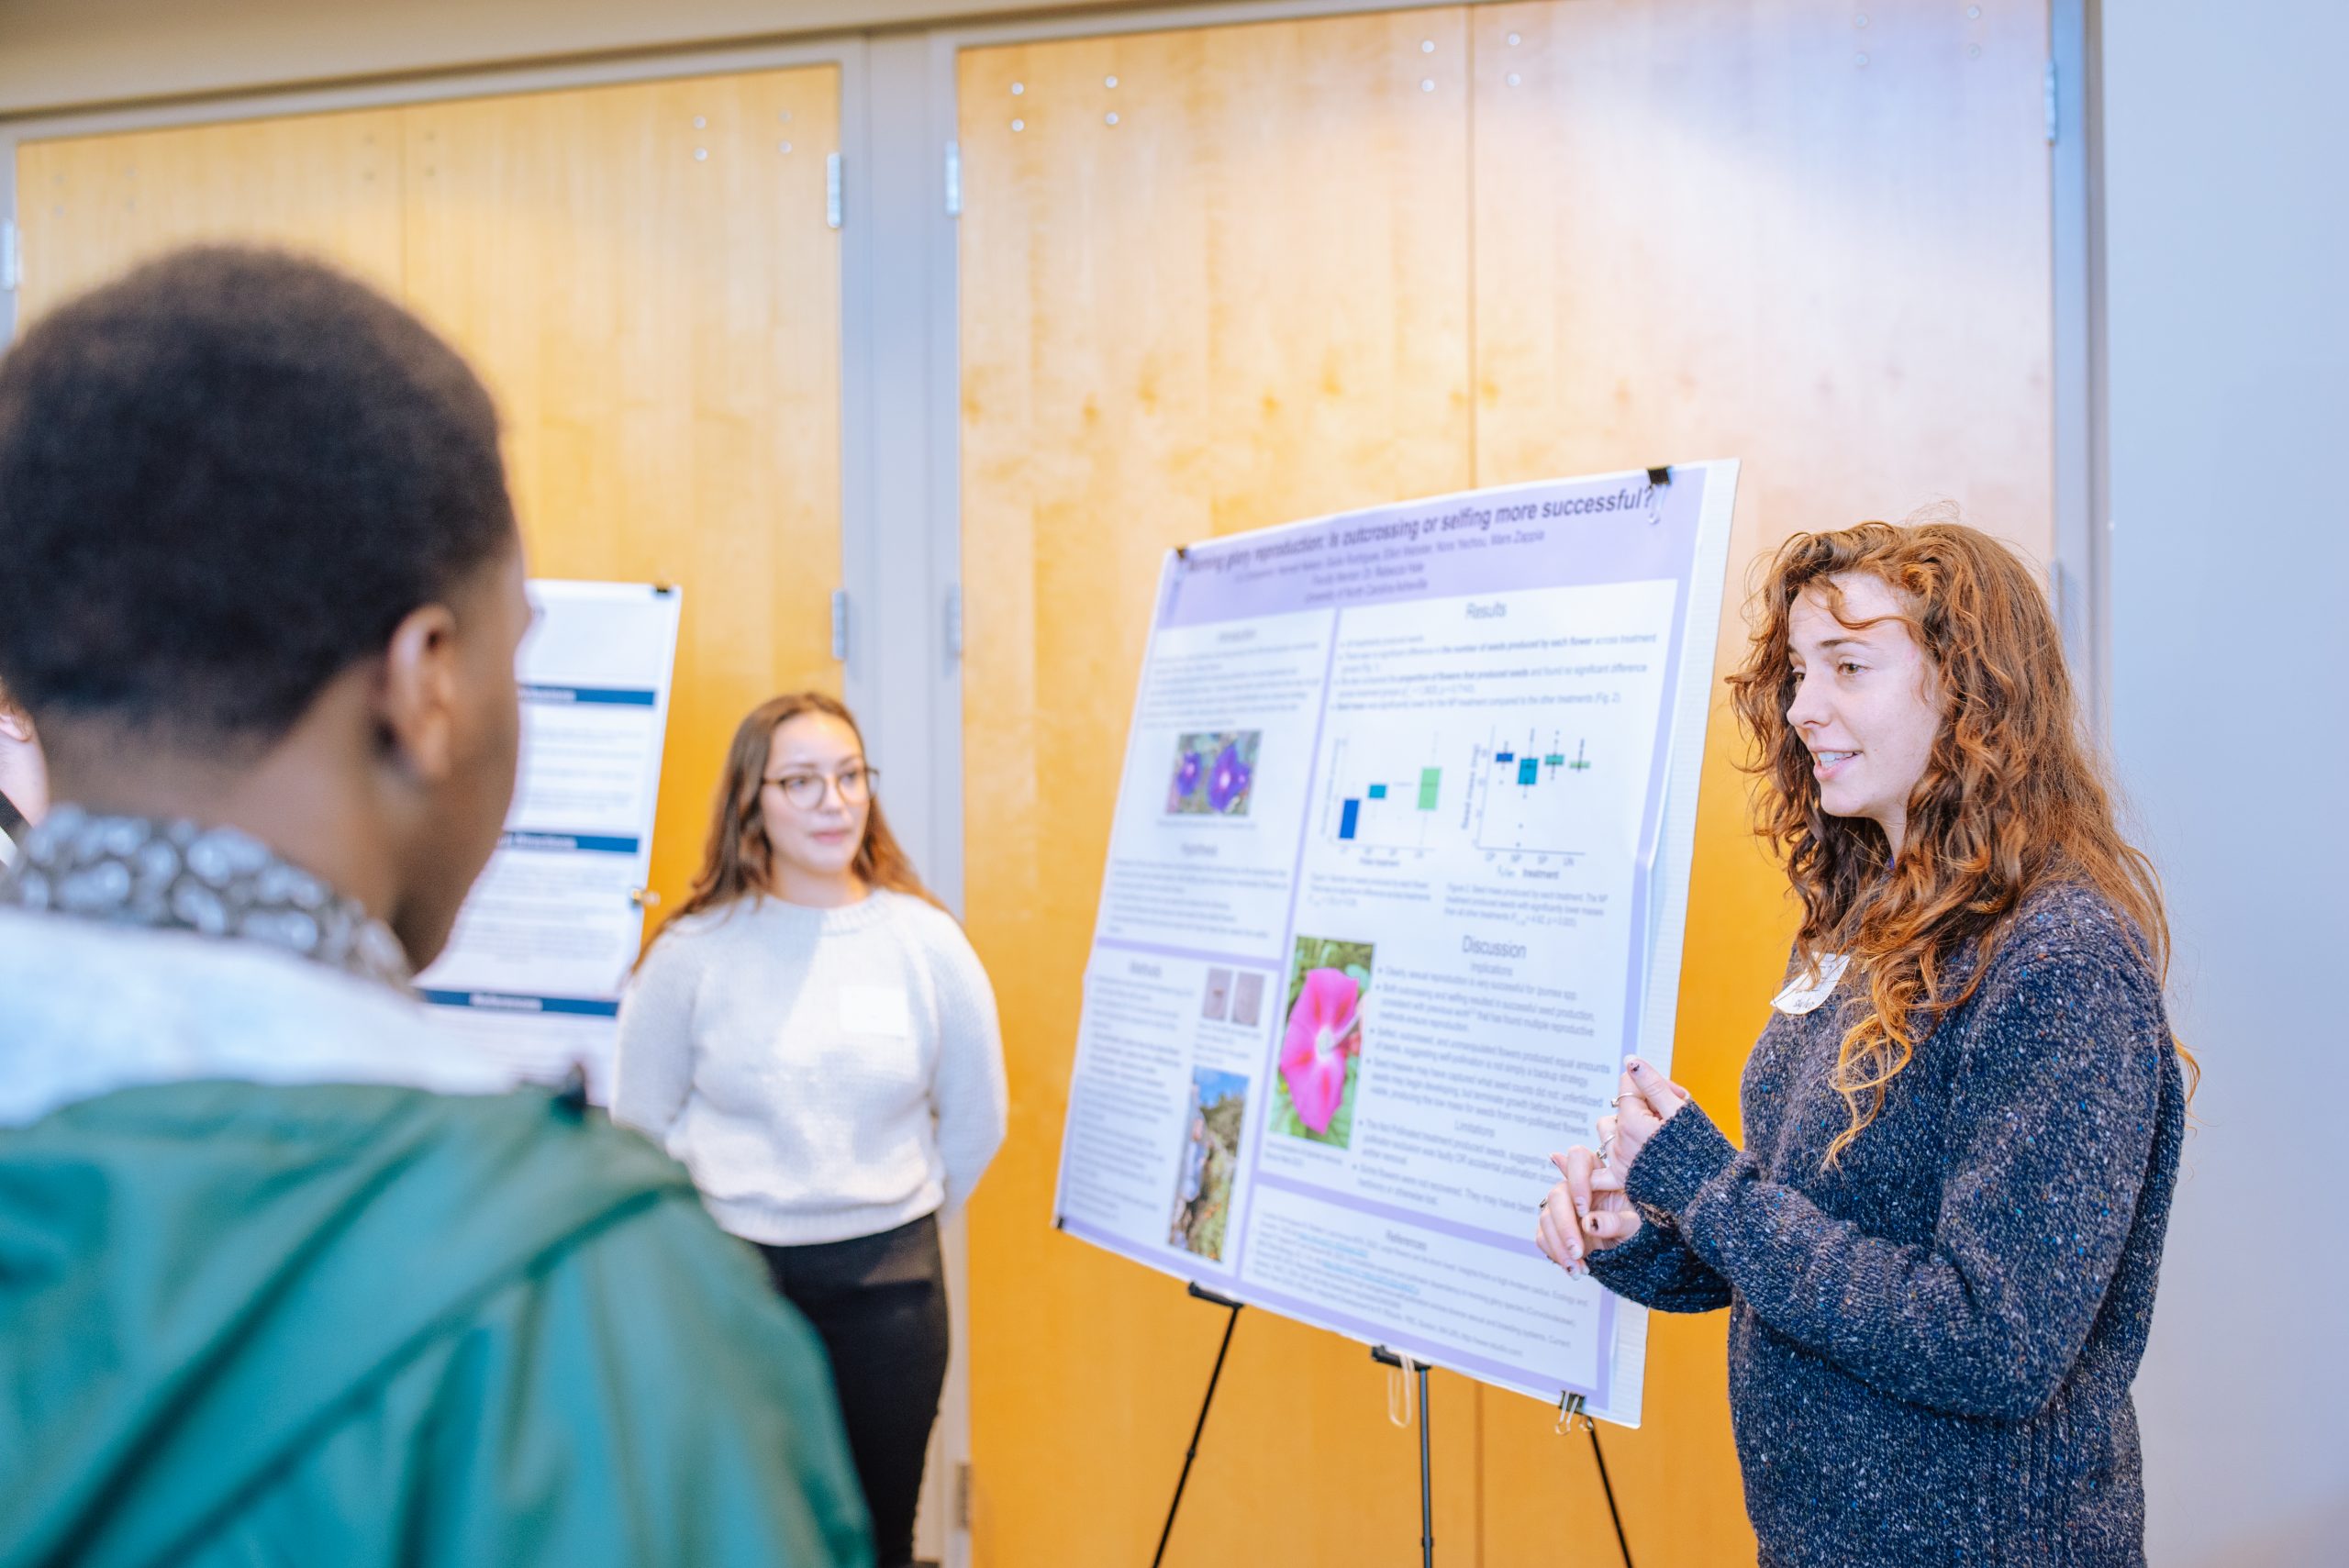 A student presenting an undergraduate research project